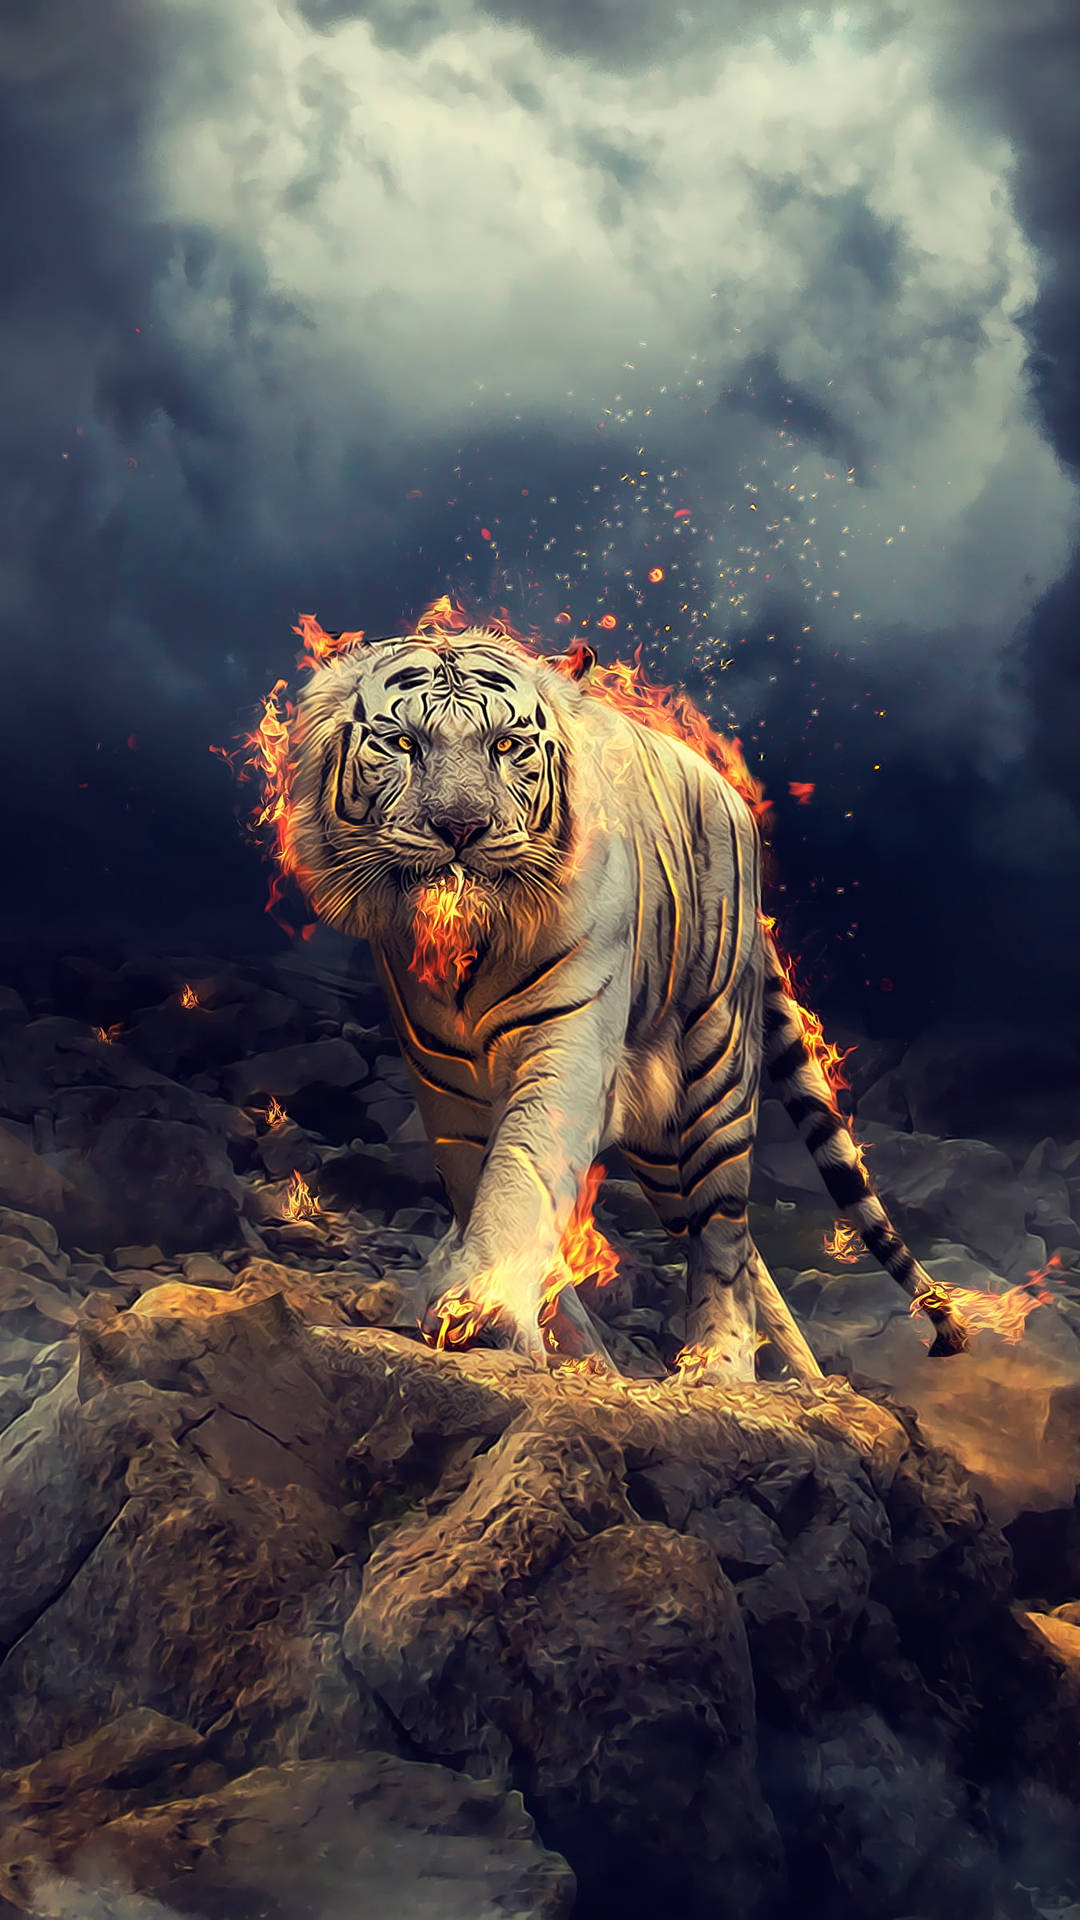 Cool Tiger Art With Fiery Embers